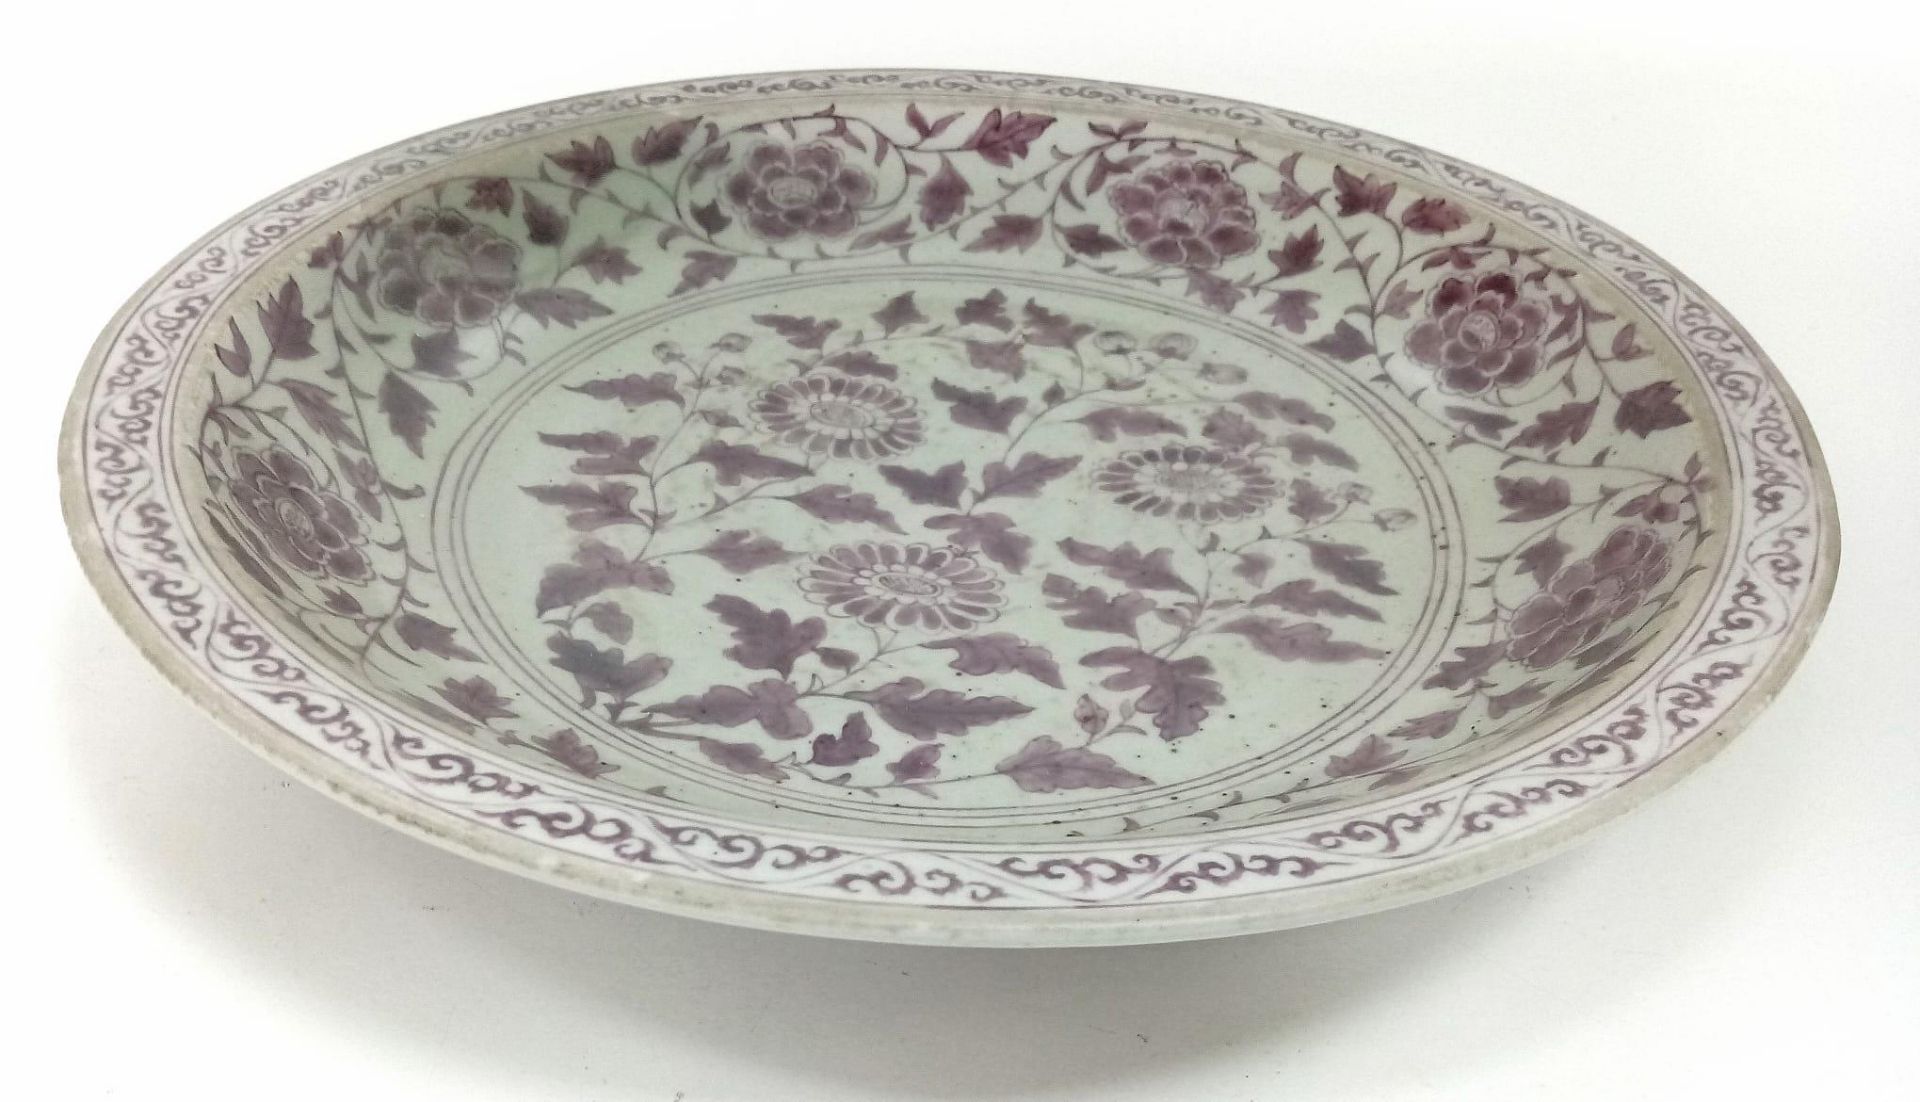 Large Antique Burgundy Floral Serving Dish. Whilst no markings exist on this large bowl, the hand- - Image 3 of 6